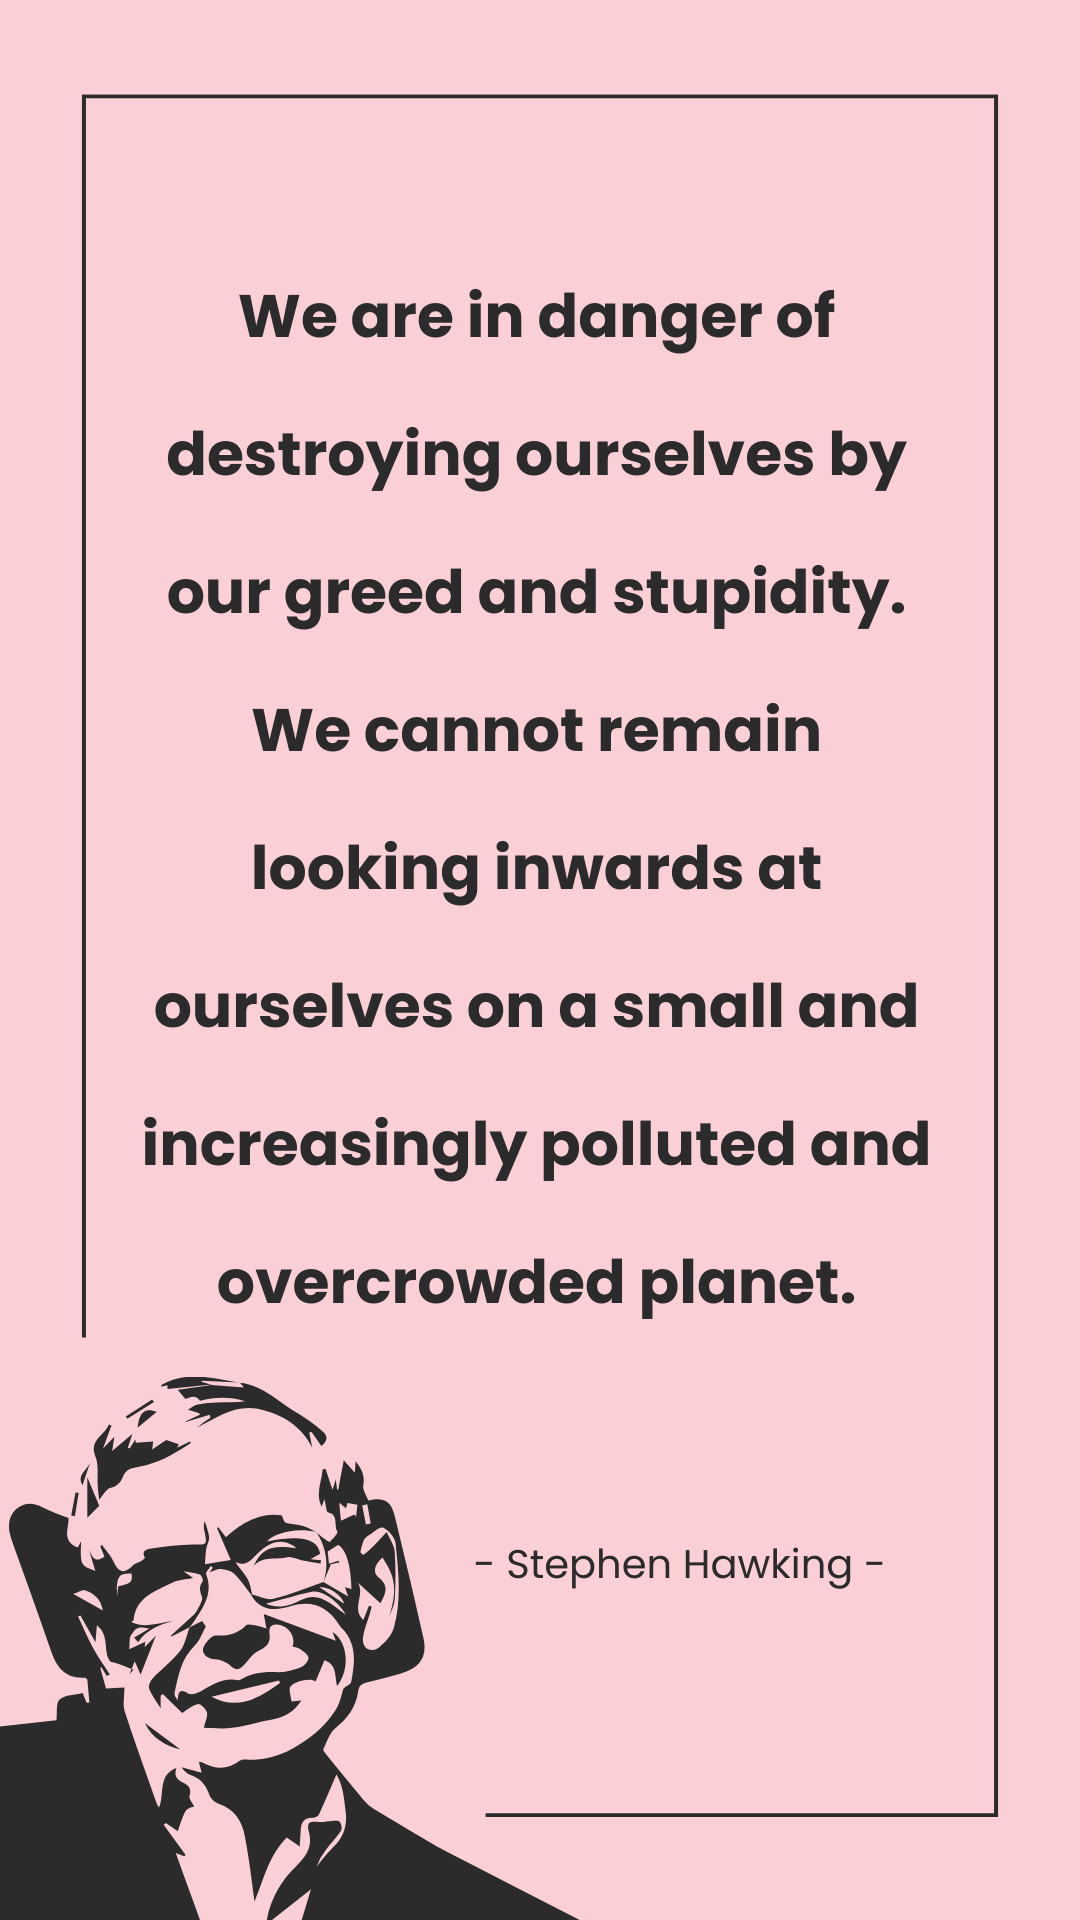 Global Warming Quote for Essay